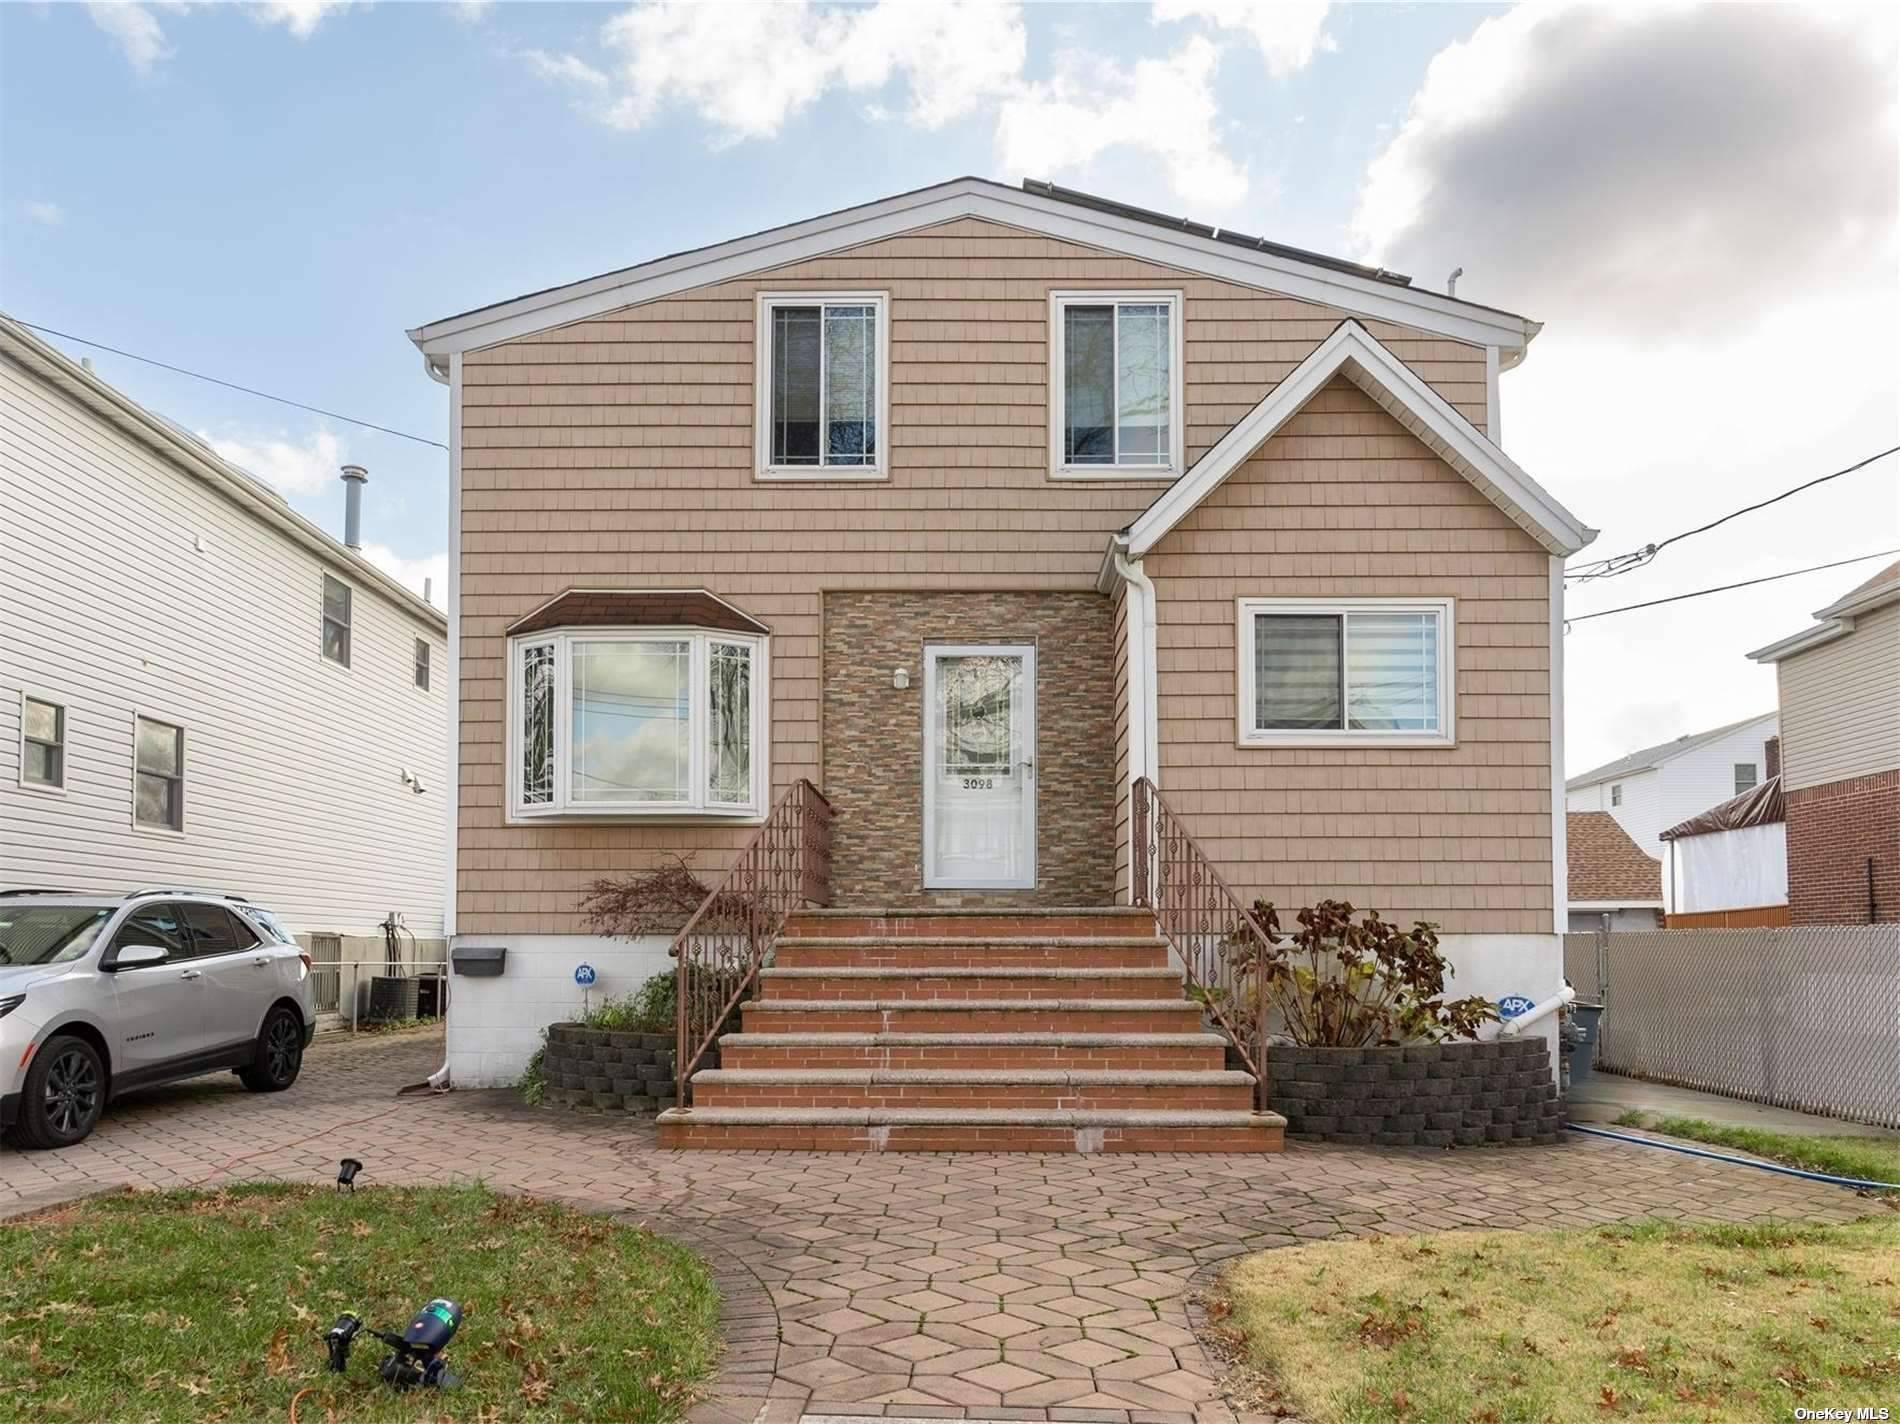 Beautifully maintained Throgs Neck home with amazing water views and modern amenities.